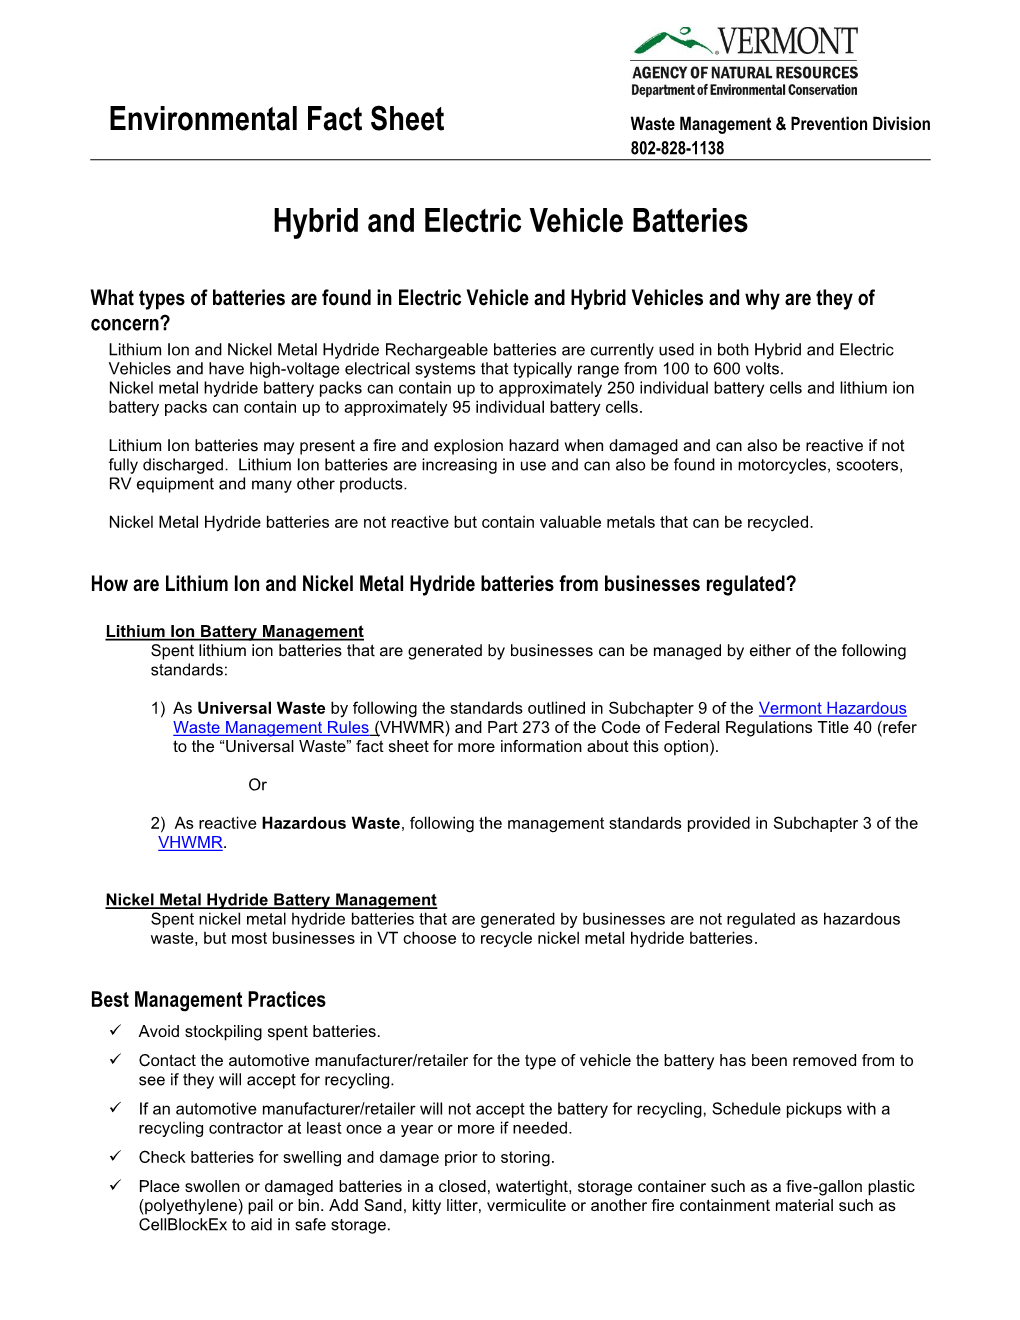 Batteries, Electric Vehicle